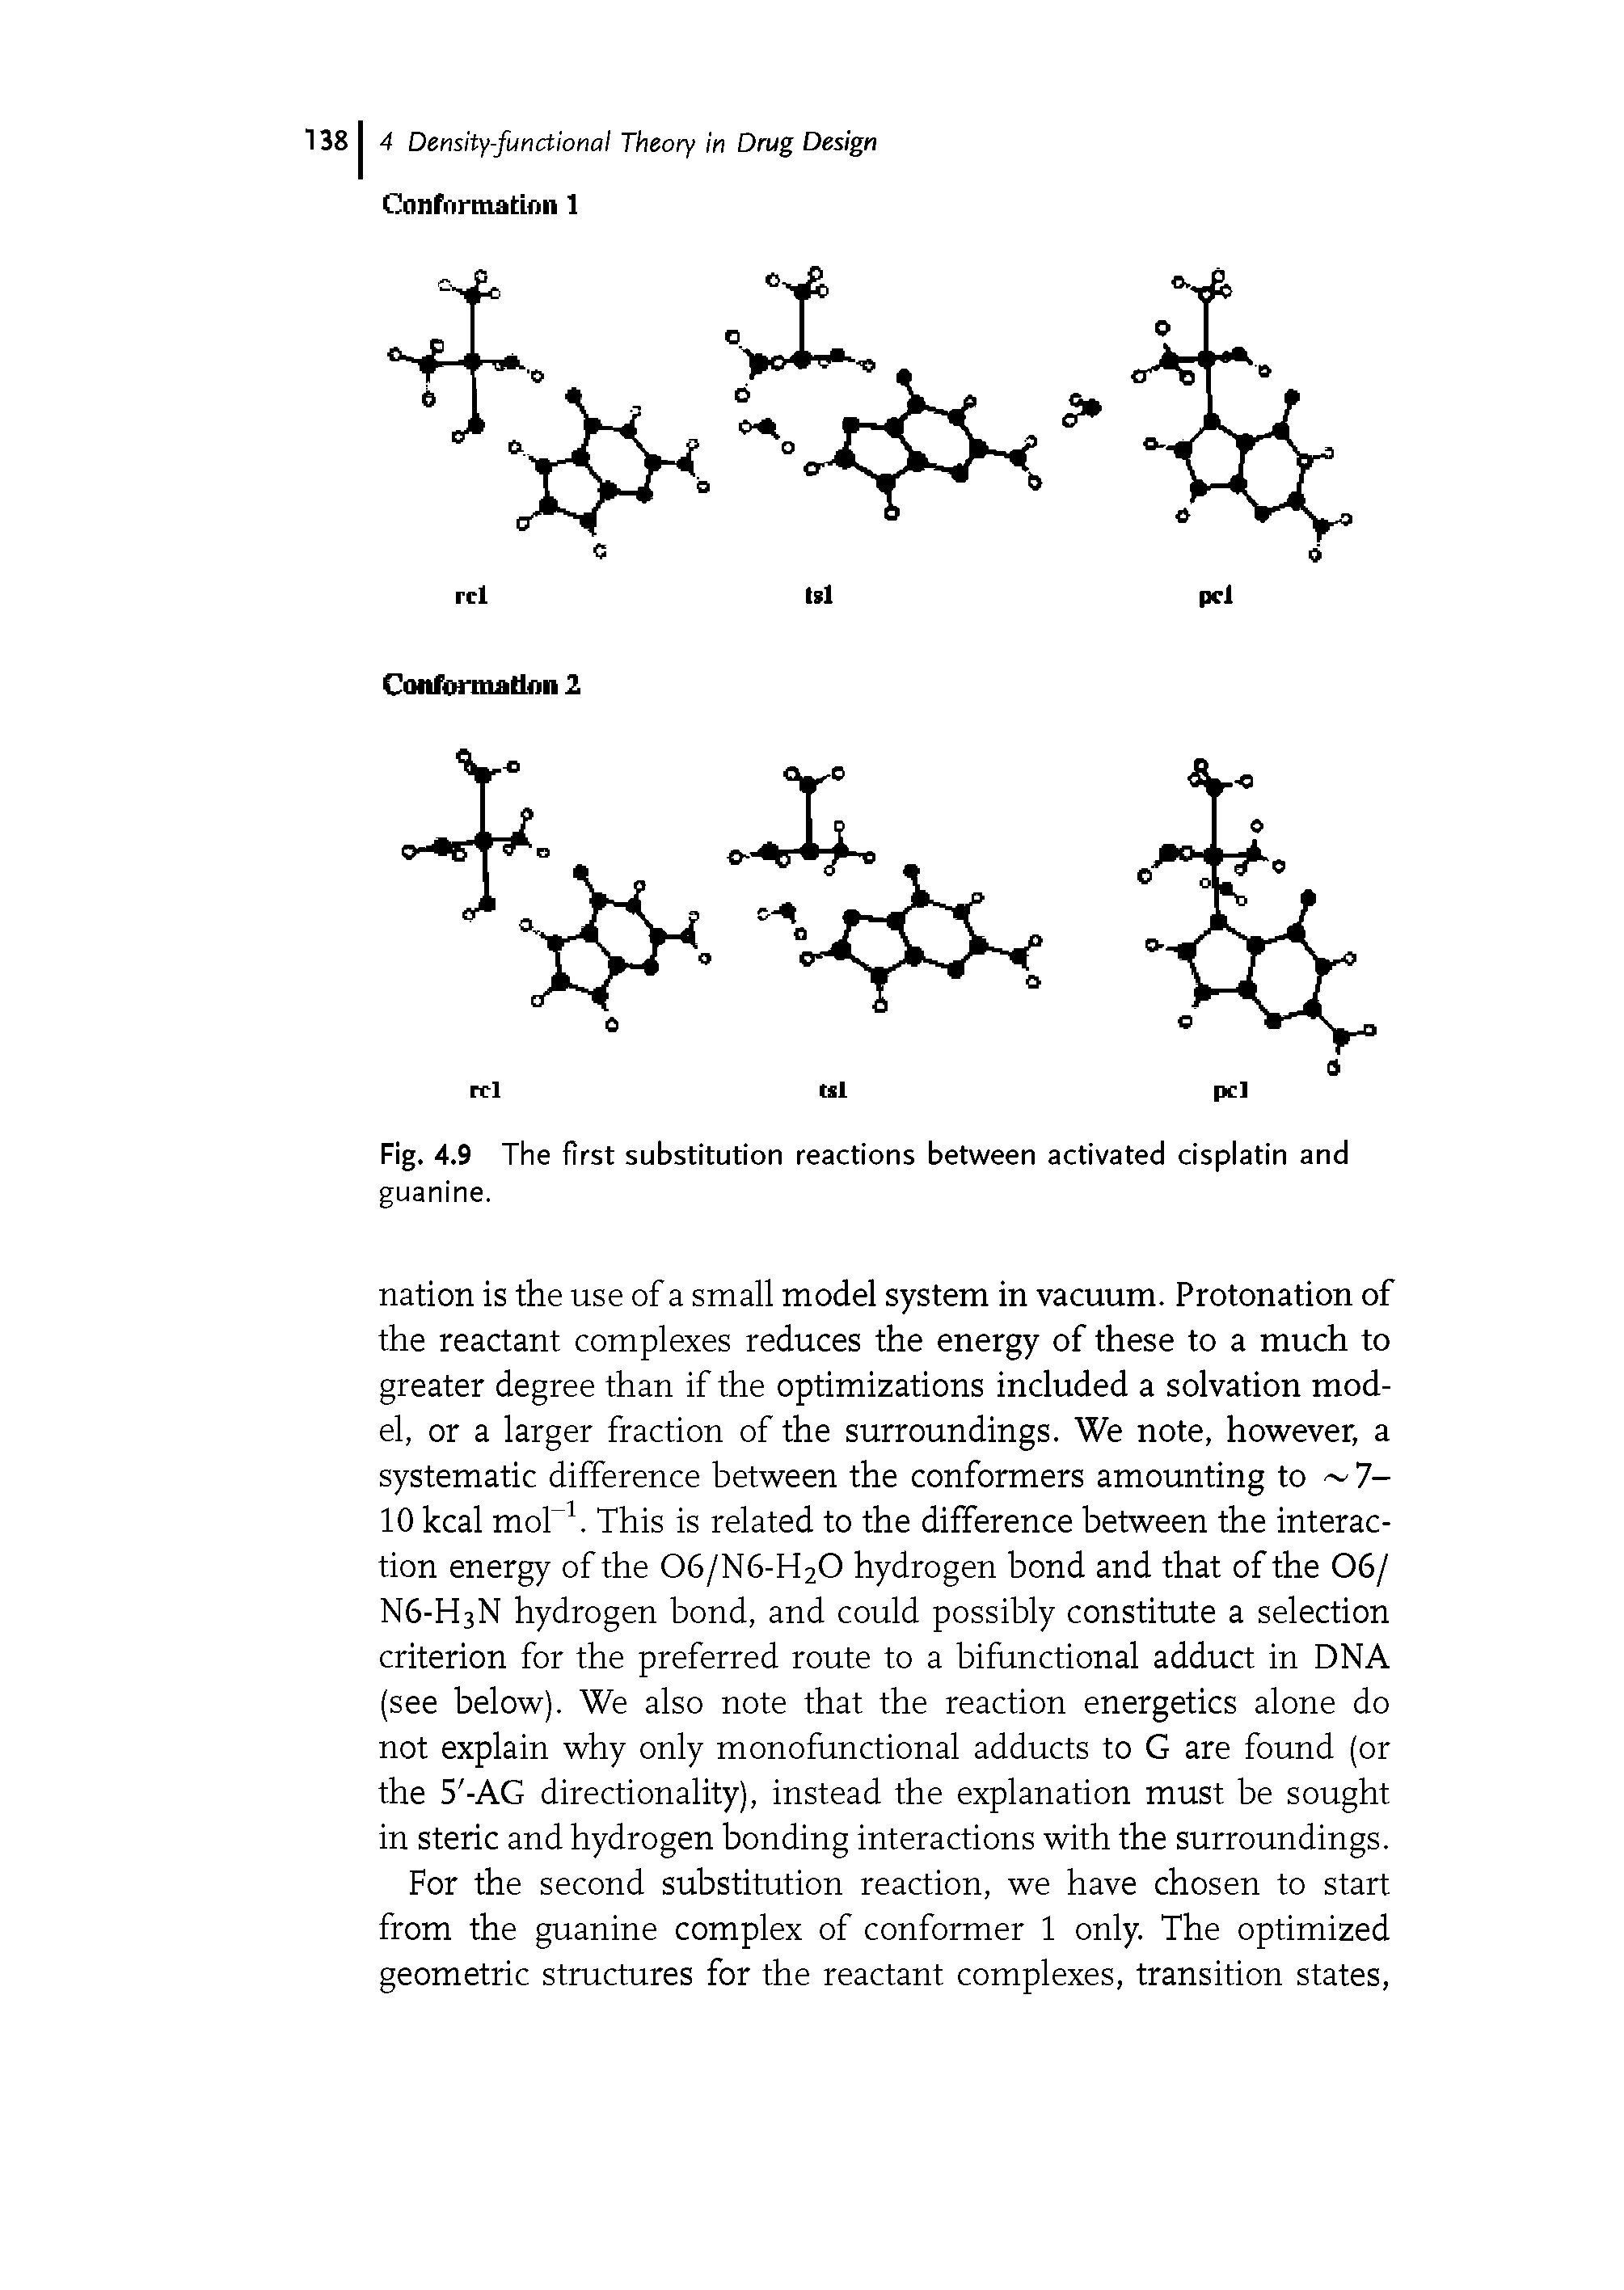 Fig. 4.9 The first substitution reactions between activated cisplatin and guanine.